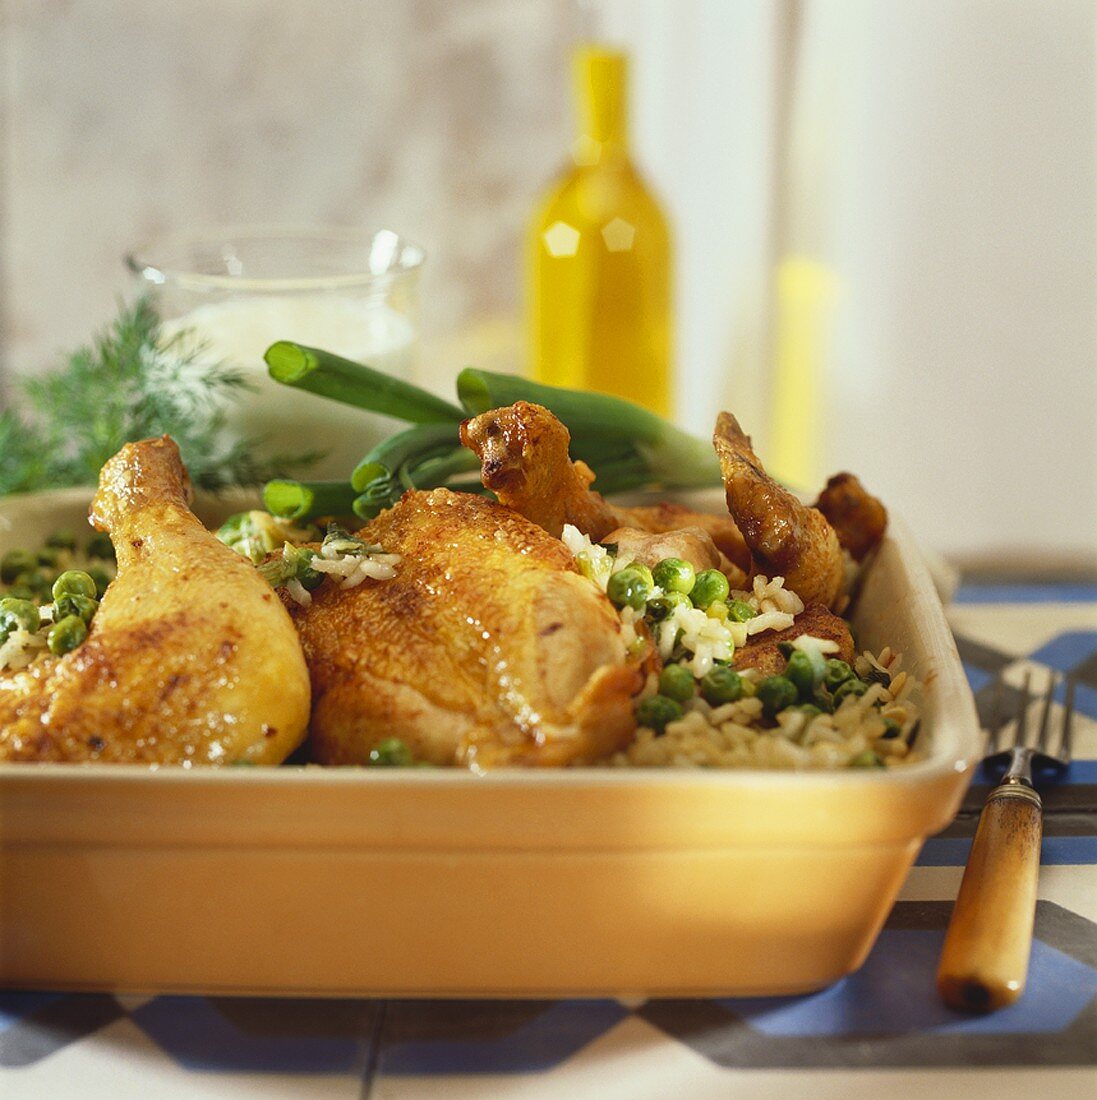 Braised chicken with rice and peas